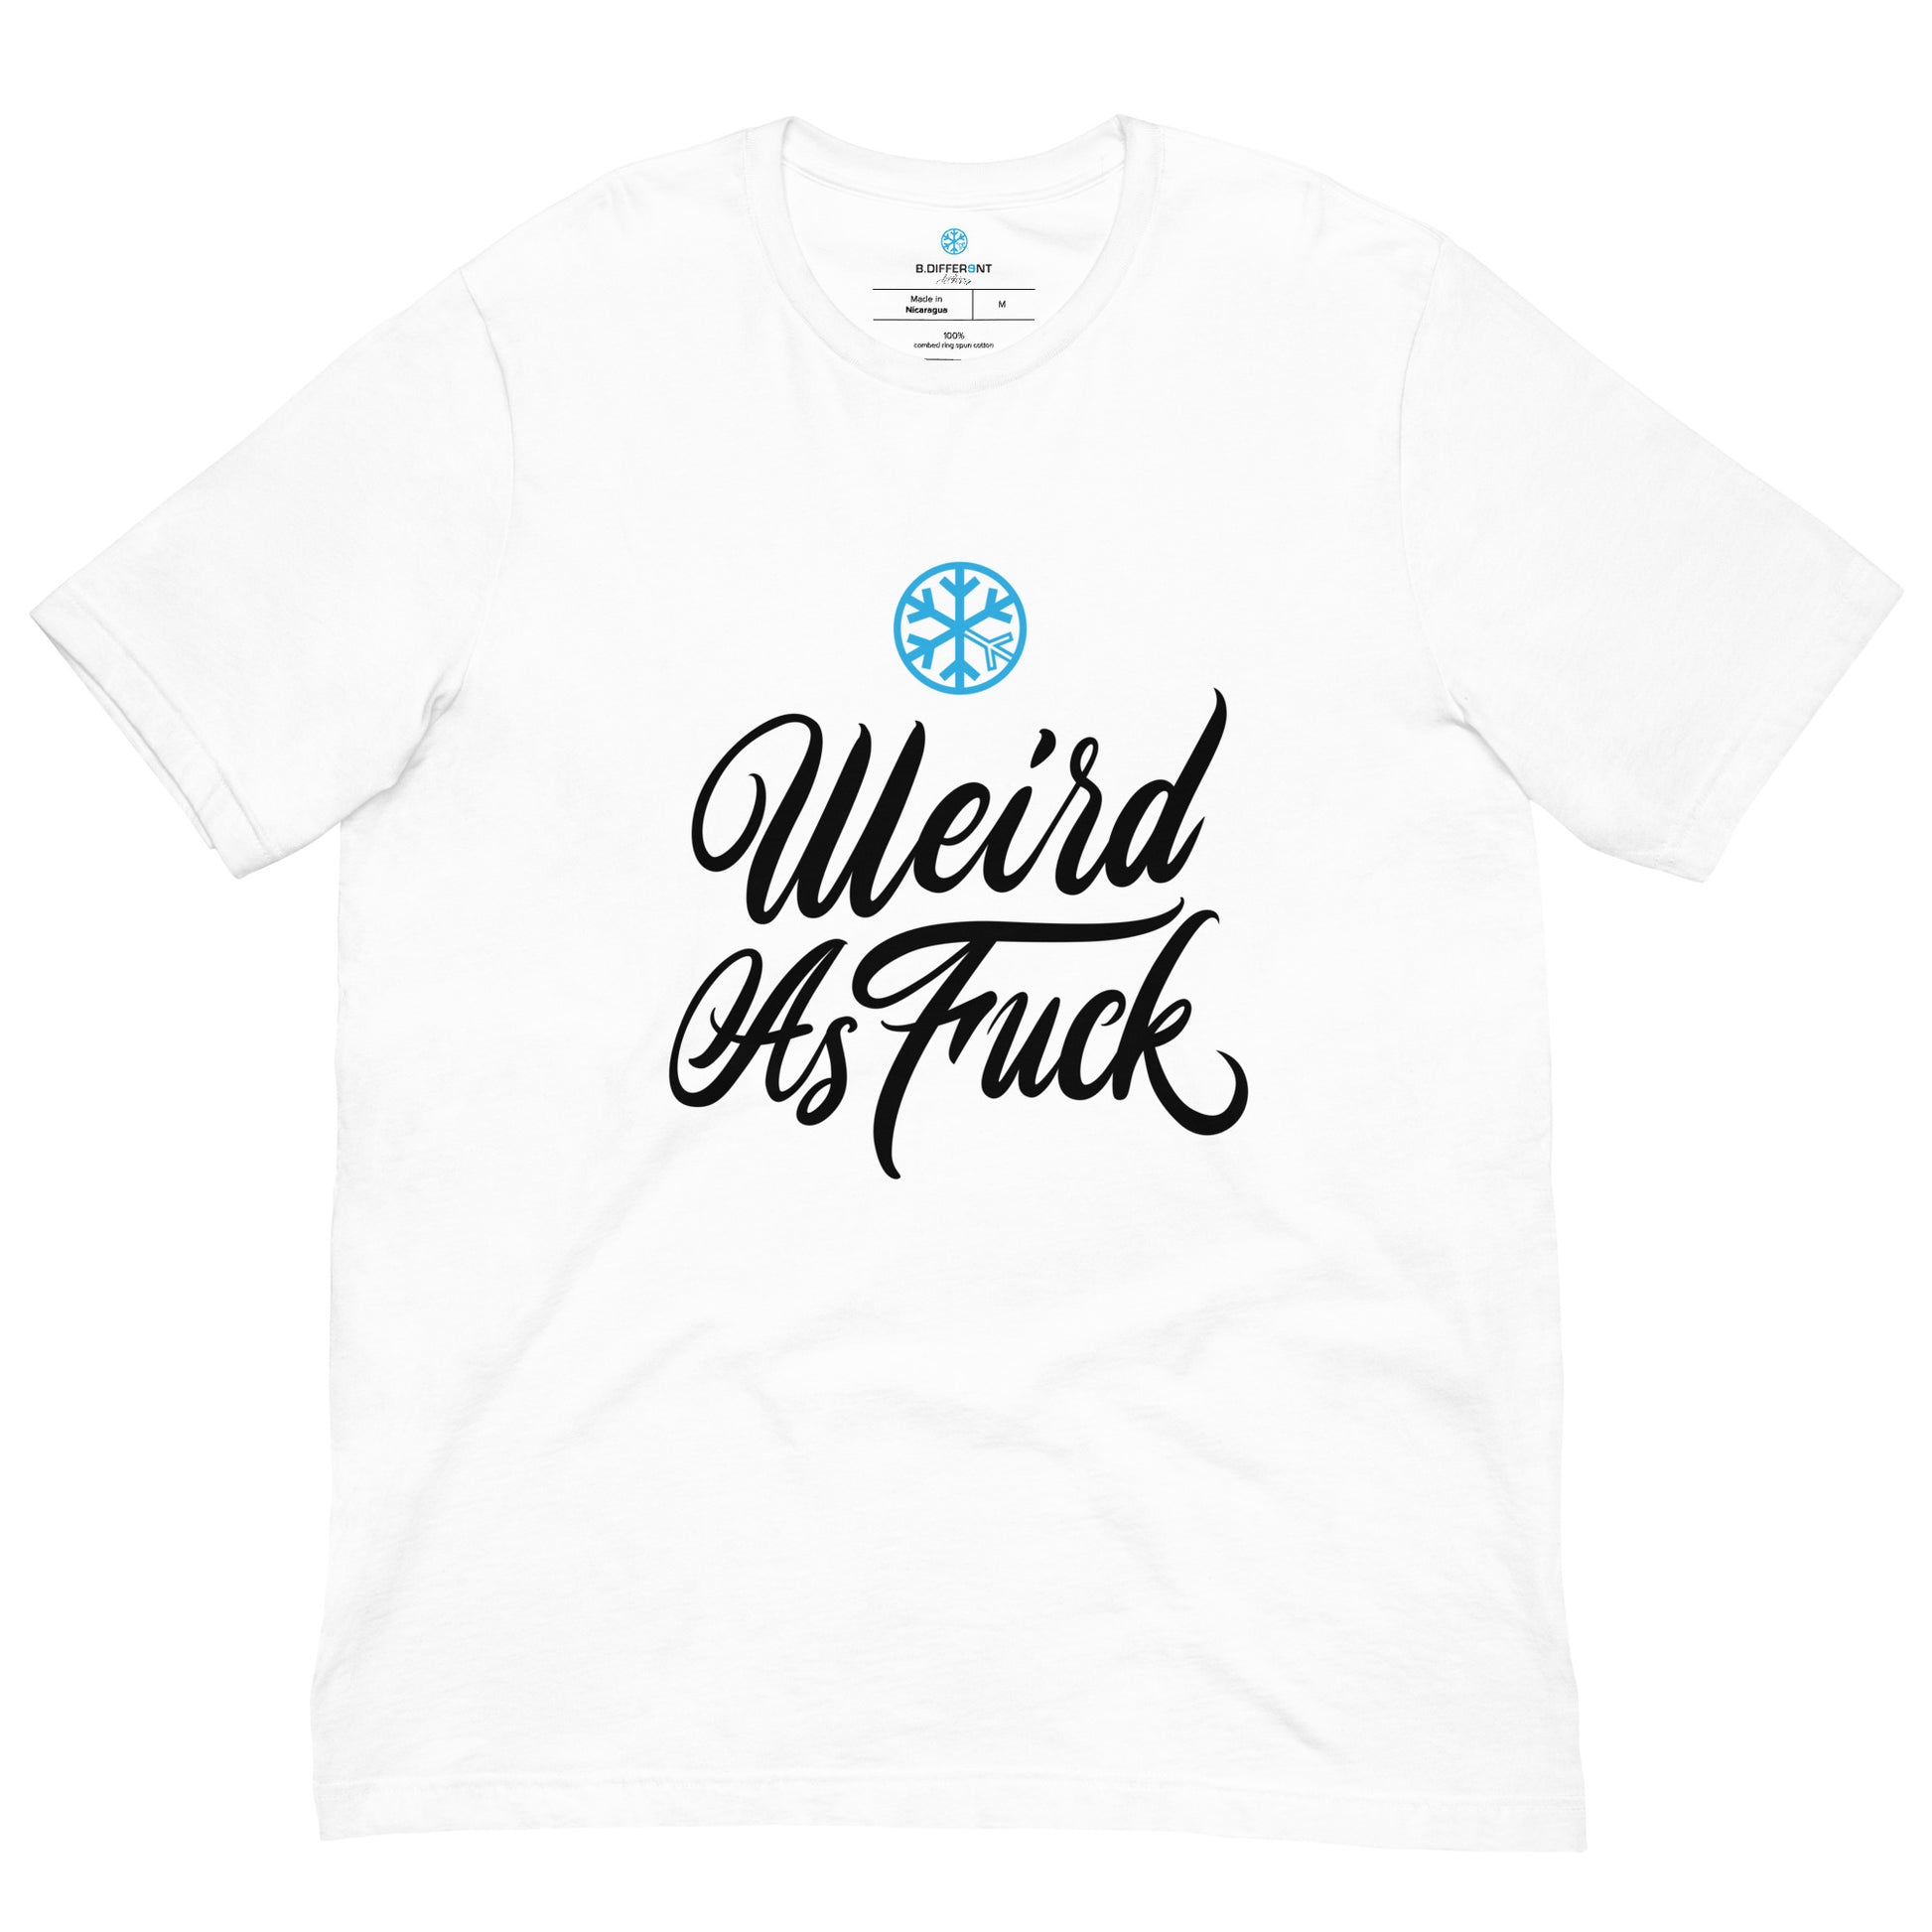 Weird As Fuck white tee by B.Different Clothing independent streetwear inspired by street art graffiti